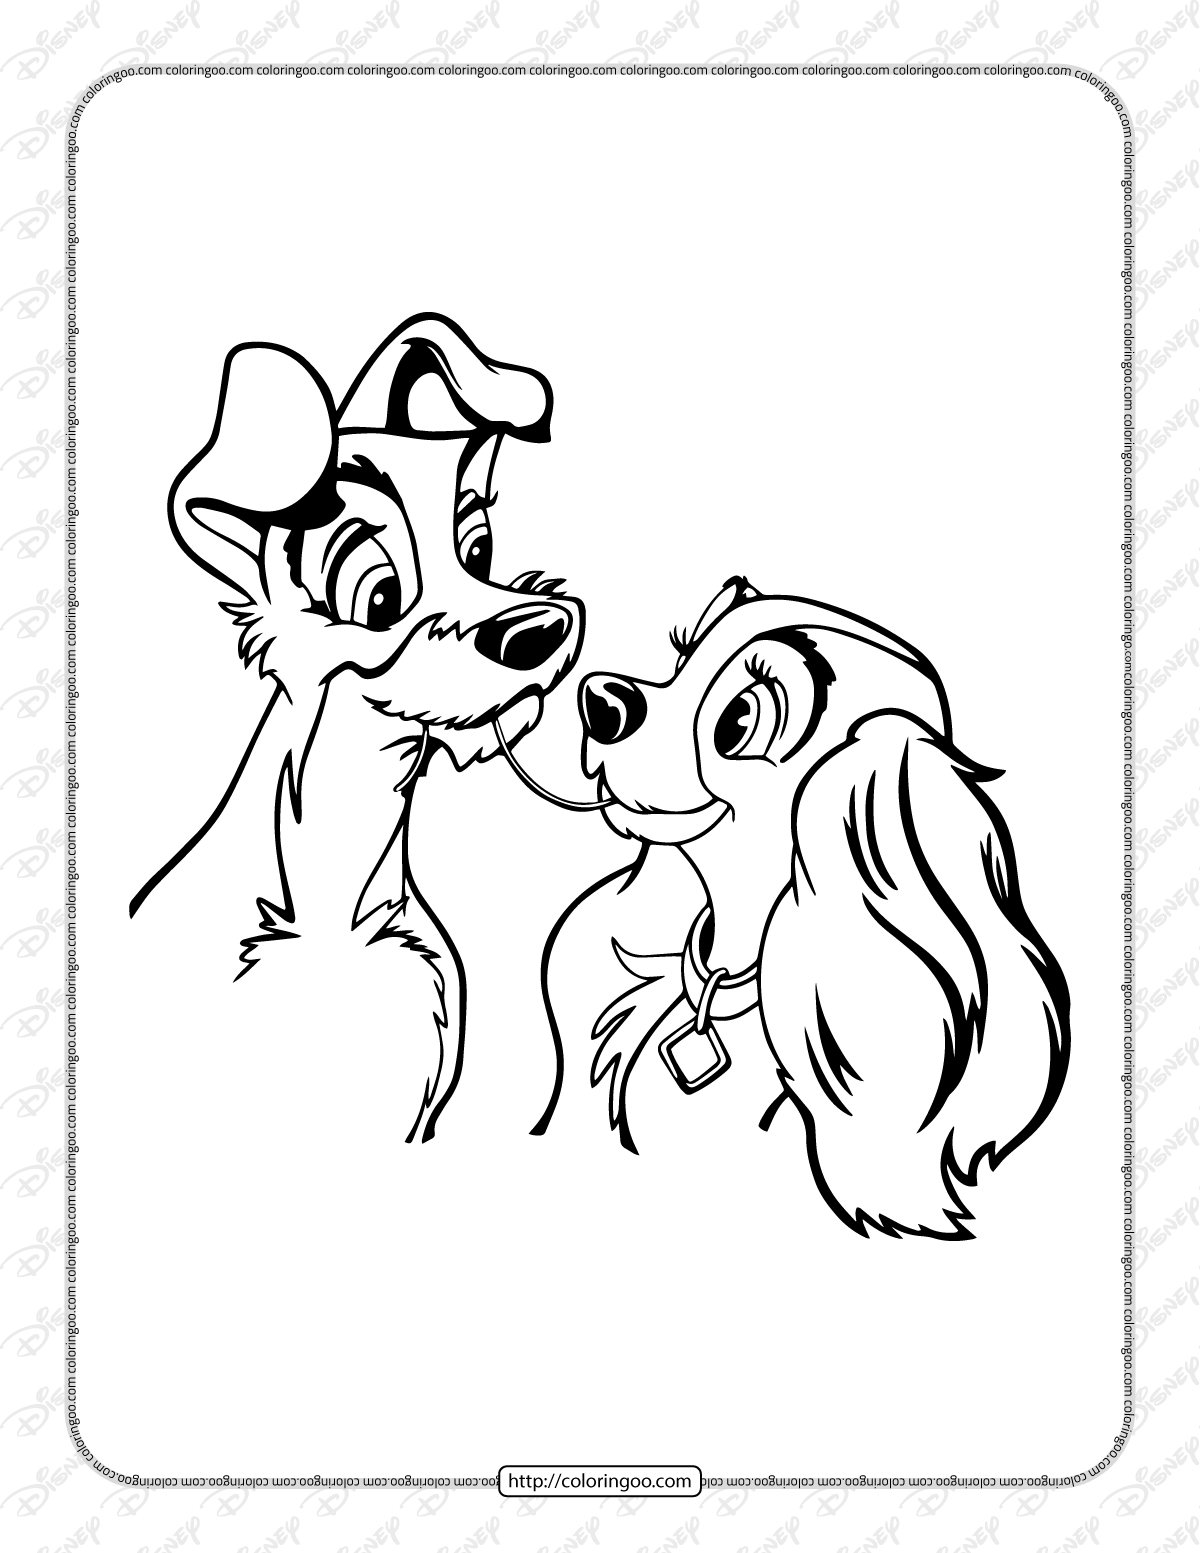 lady and the tramp pdf coloring book for kids